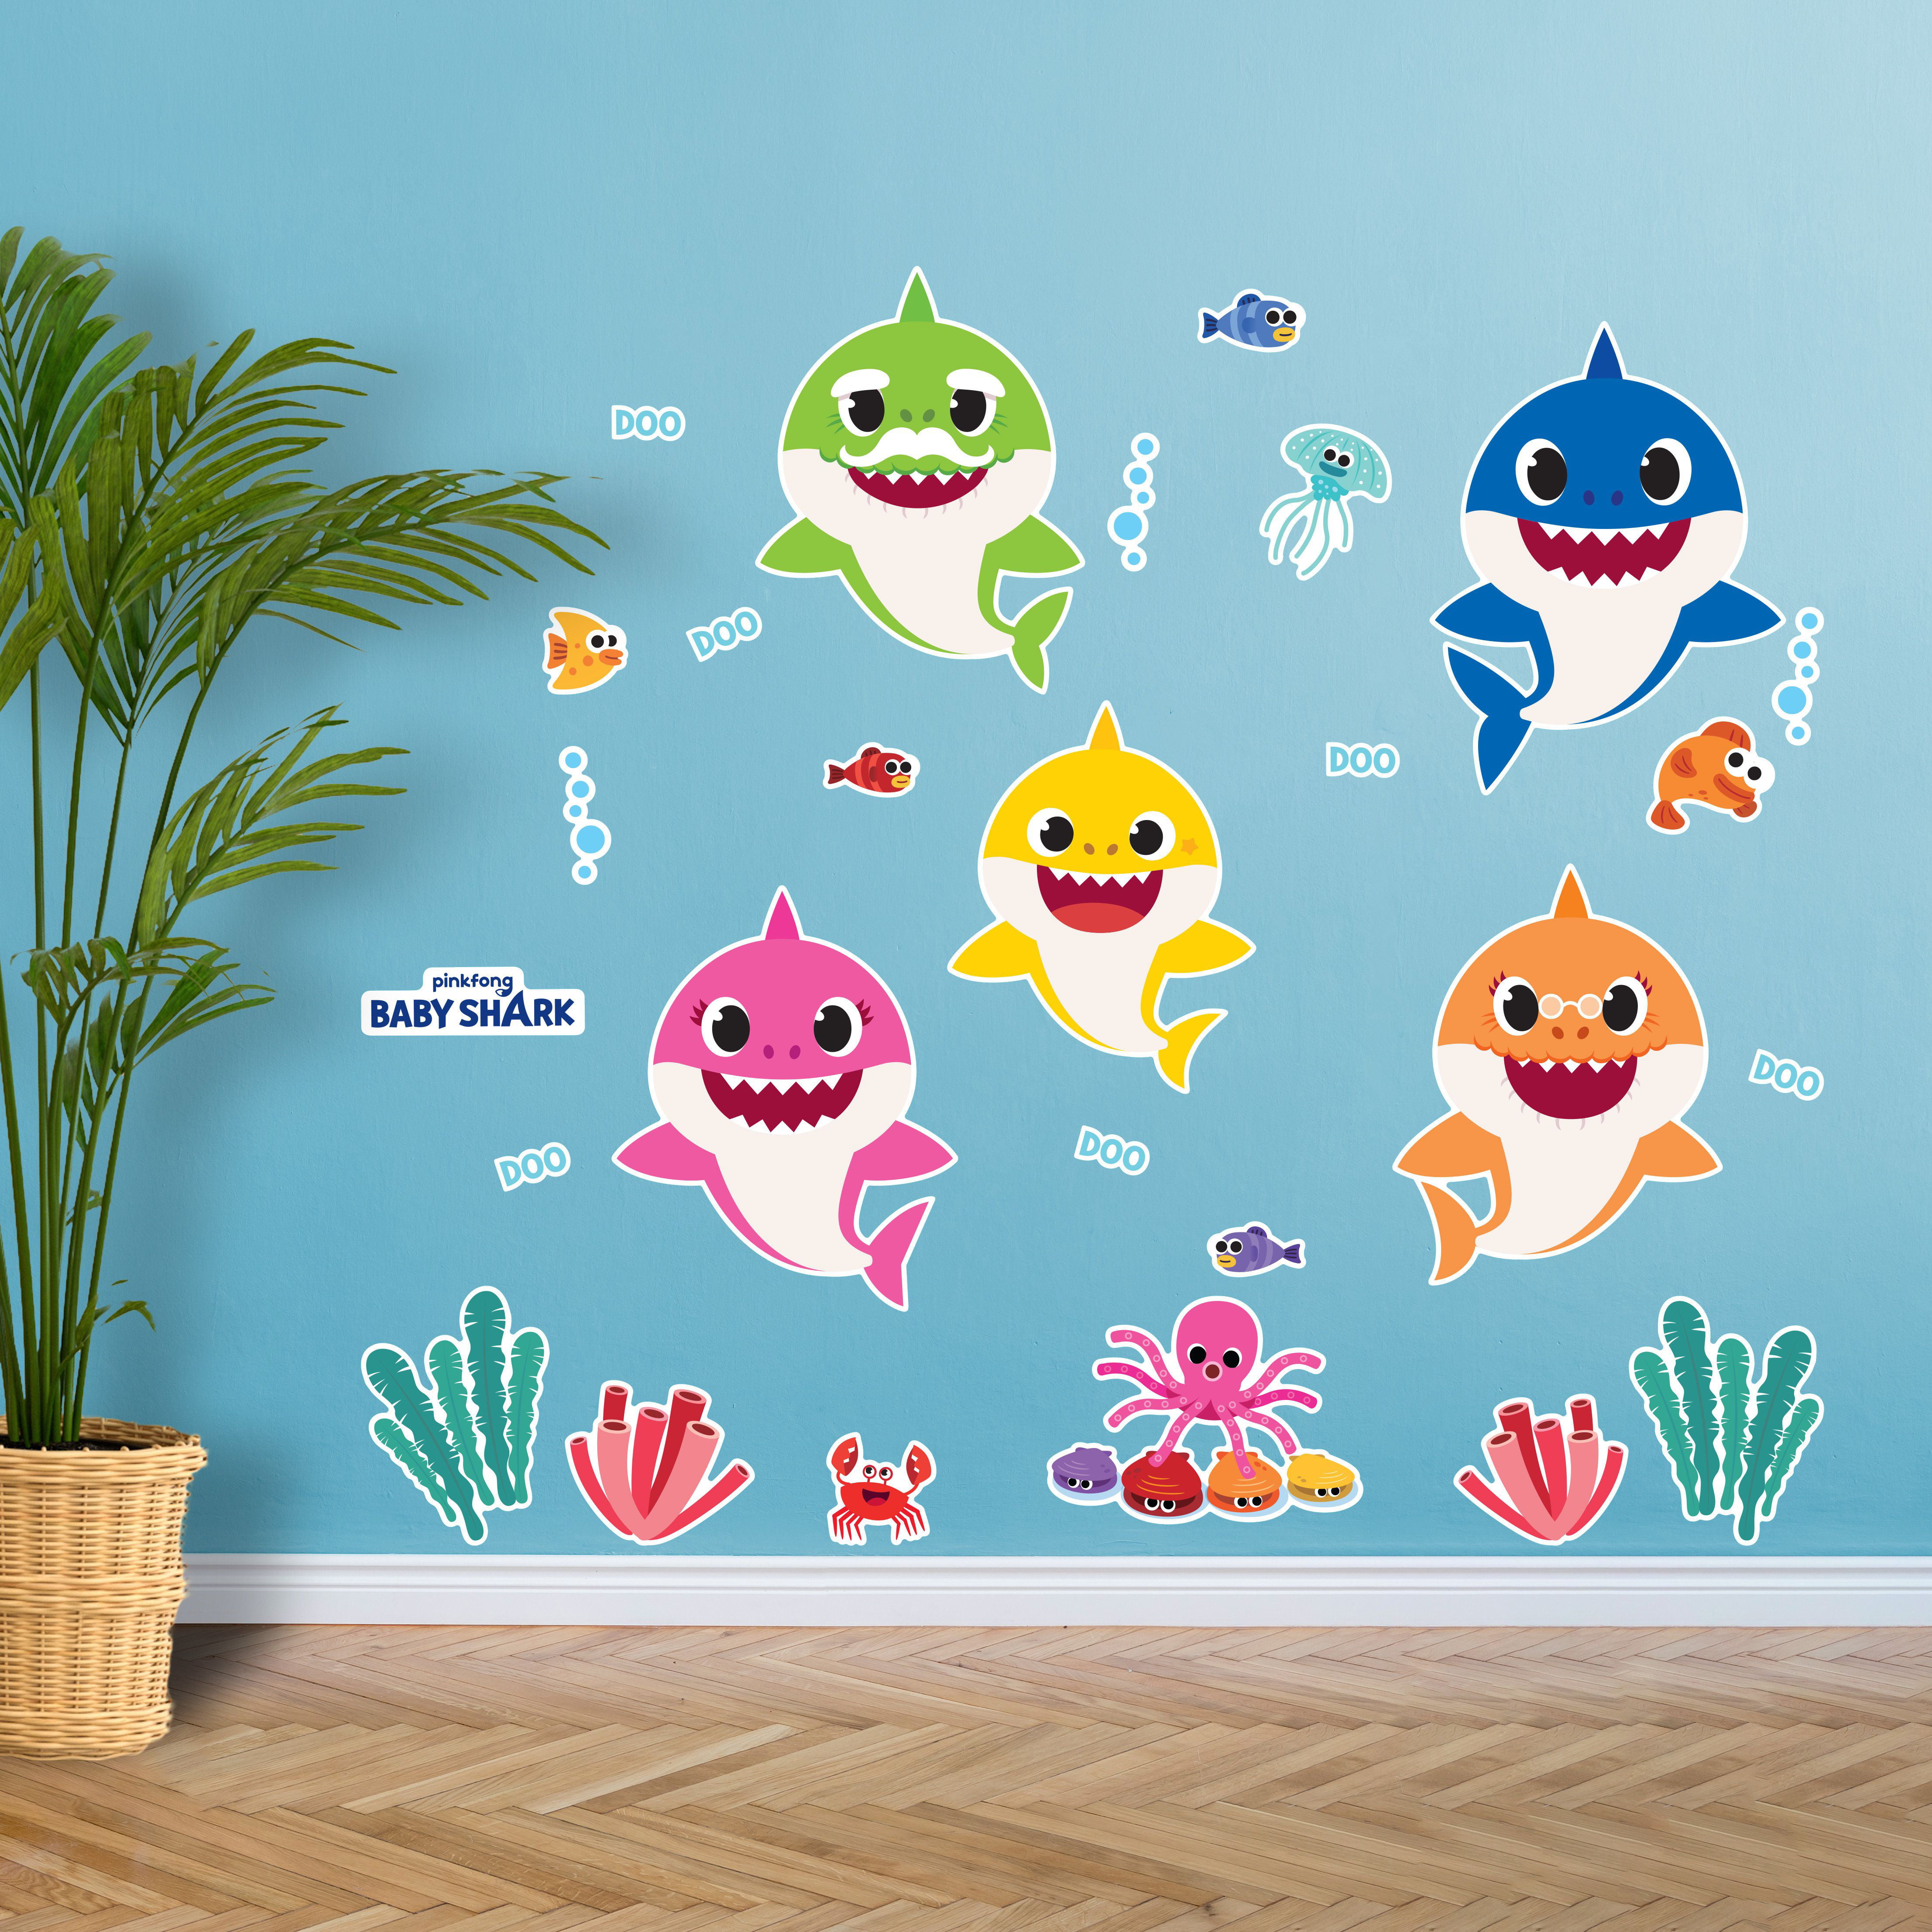 Adorable PinkFong BABY SHARK Vinyl Wall Decals*Kids Room Decor Stickers*New! 